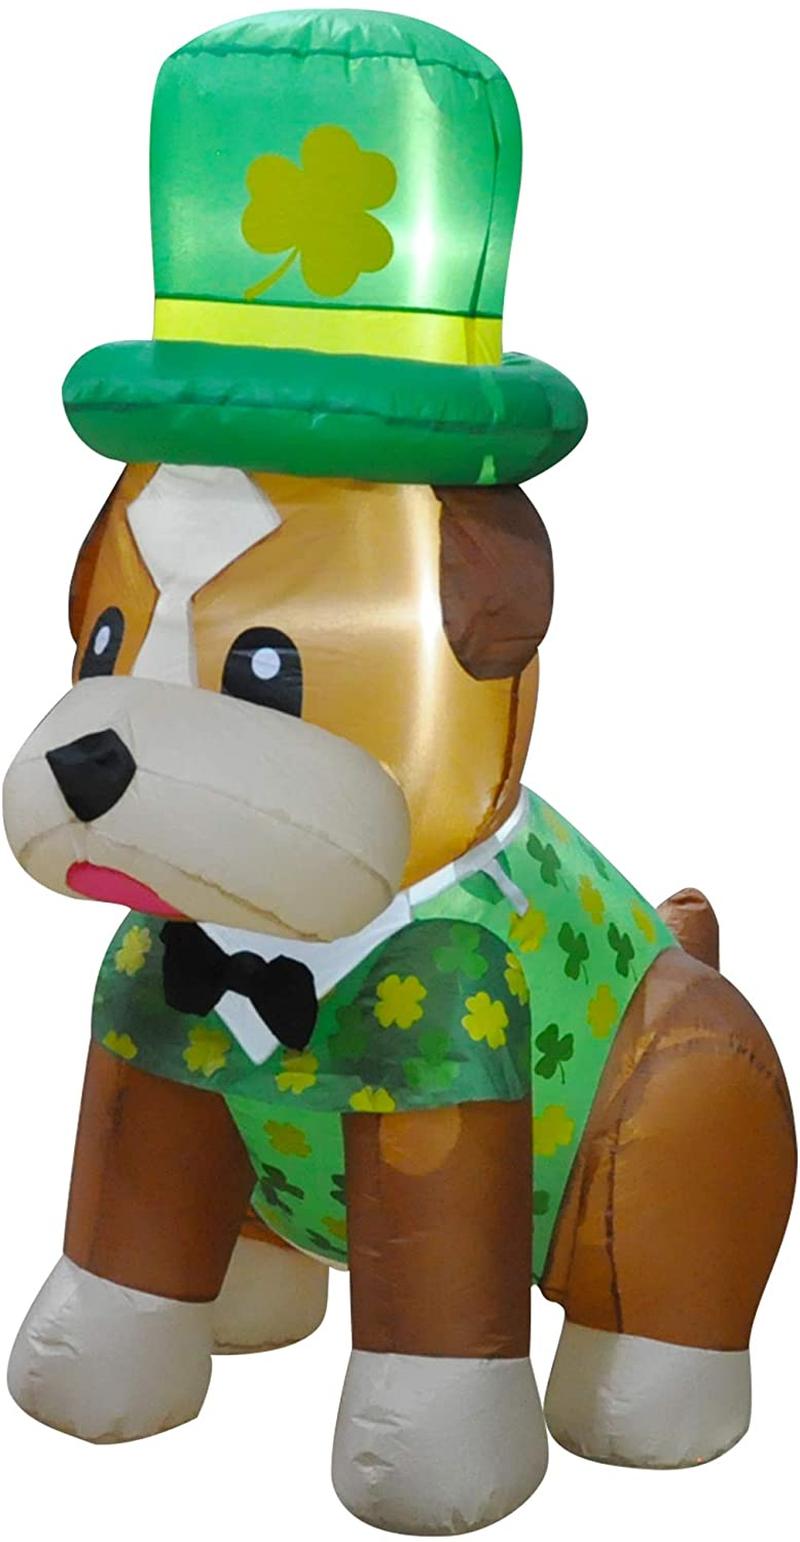 SEASONBLOW 5 Ft LED Light up Inflatable St. Patrick'S Day Bulldog Shar Pei Dog Decoration for Home Yard Lawn Garden Indoor Outdoor Arts & Entertainment > Party & Celebration > Party Supplies SEASONBLOW   